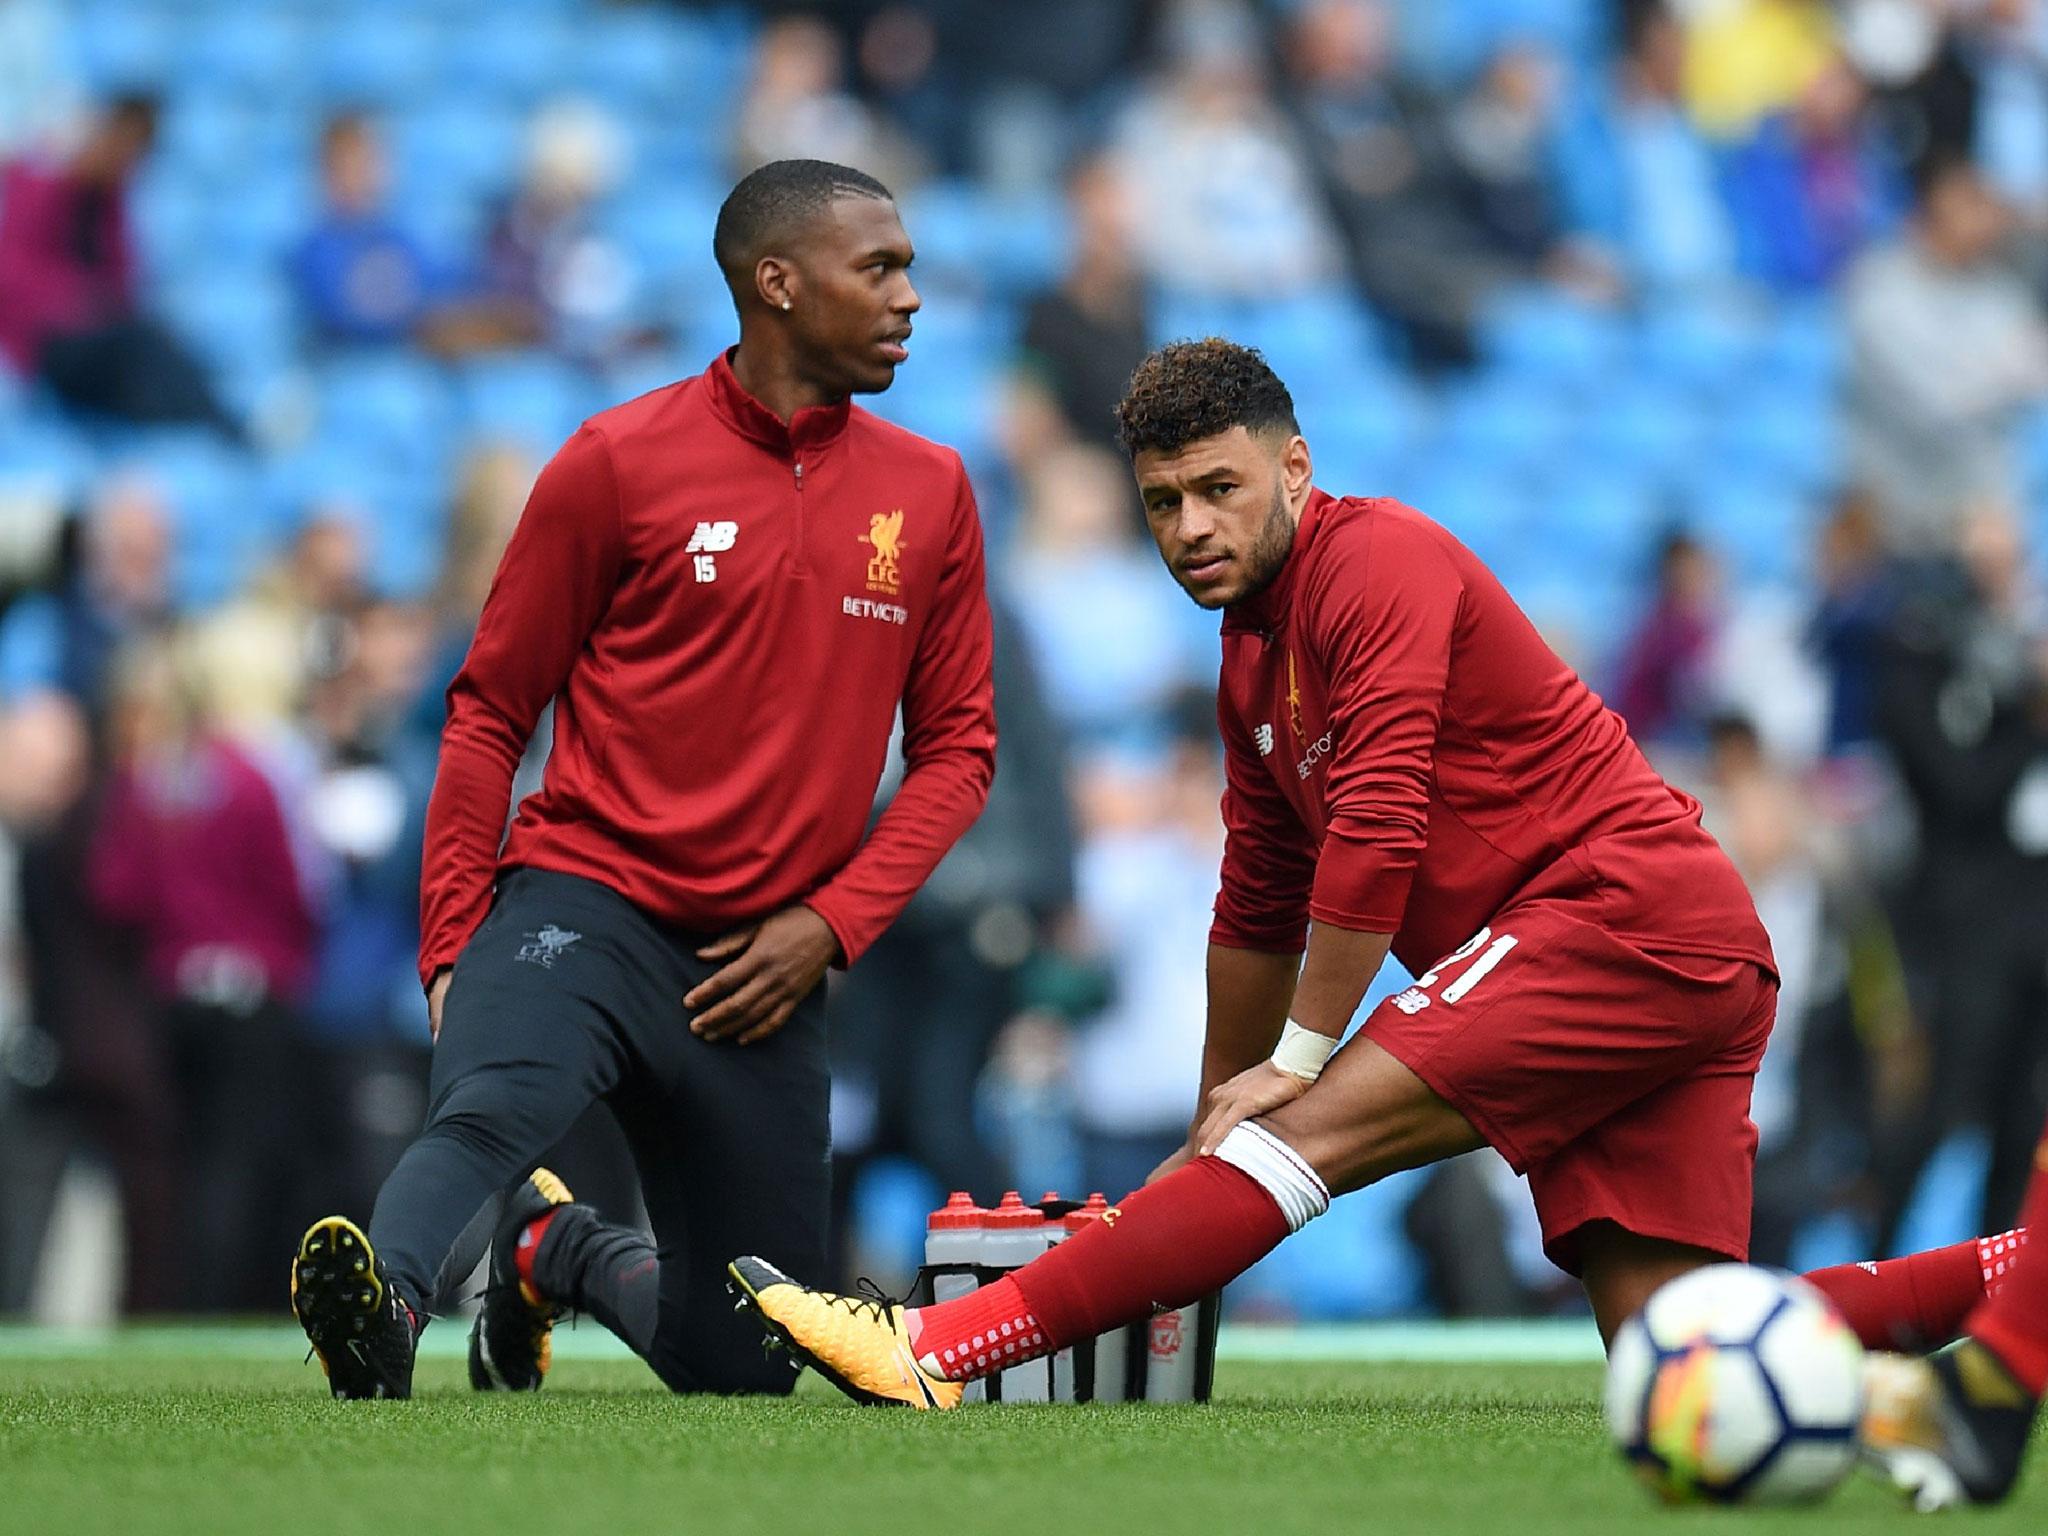 Alex Oxlade-Chamberlain was left on the bench for Saturday's clash against City